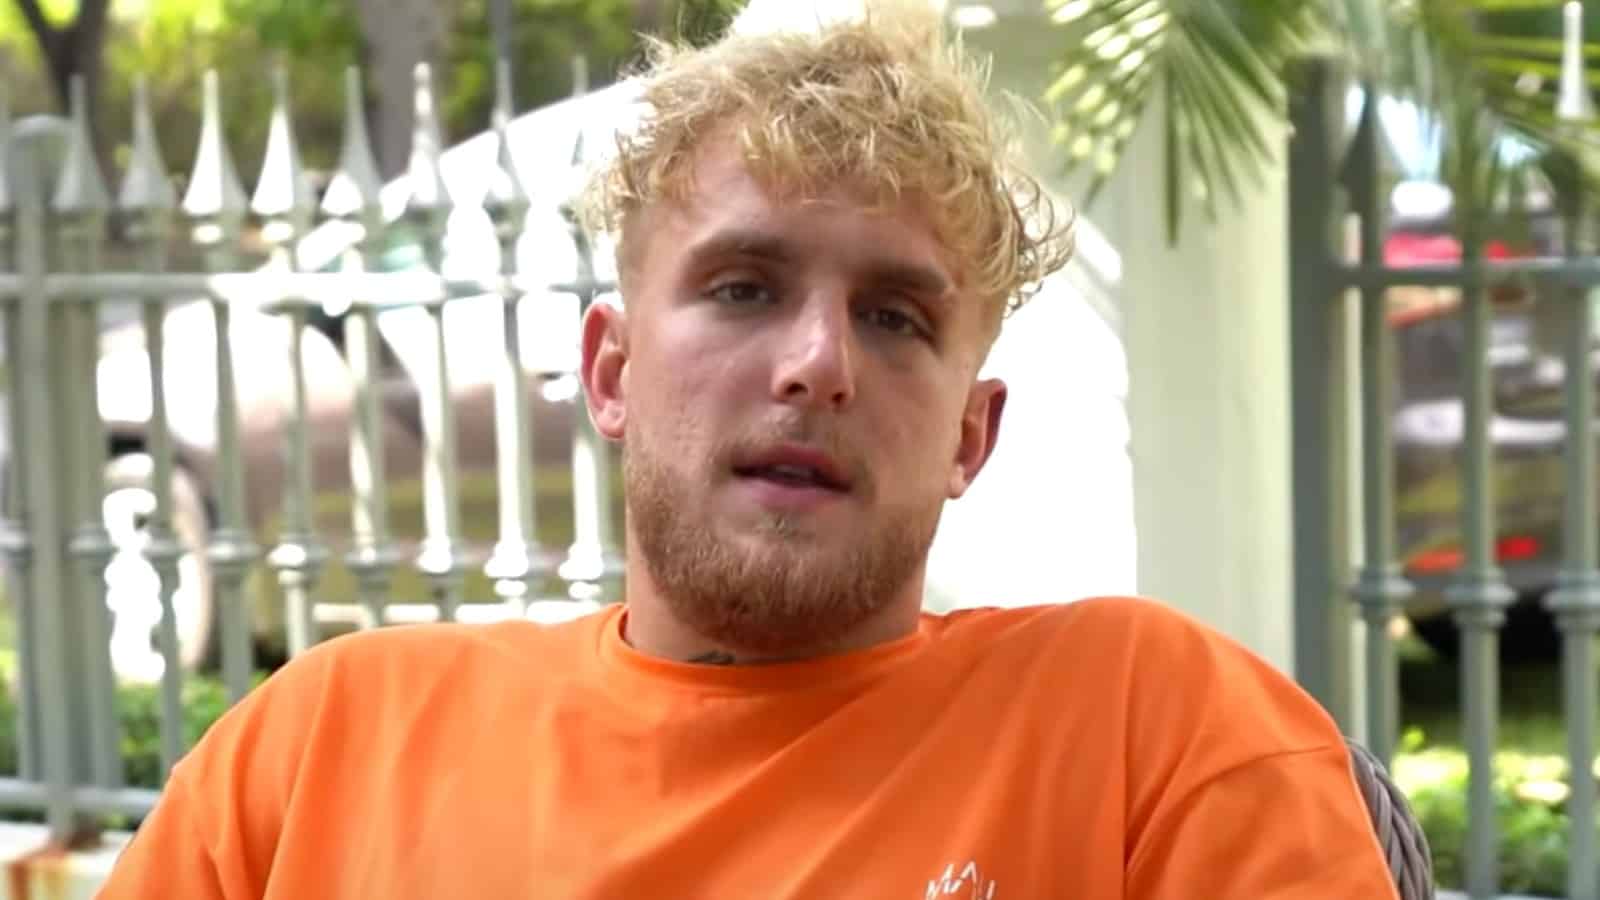 Jake Paul filming a YouTube video